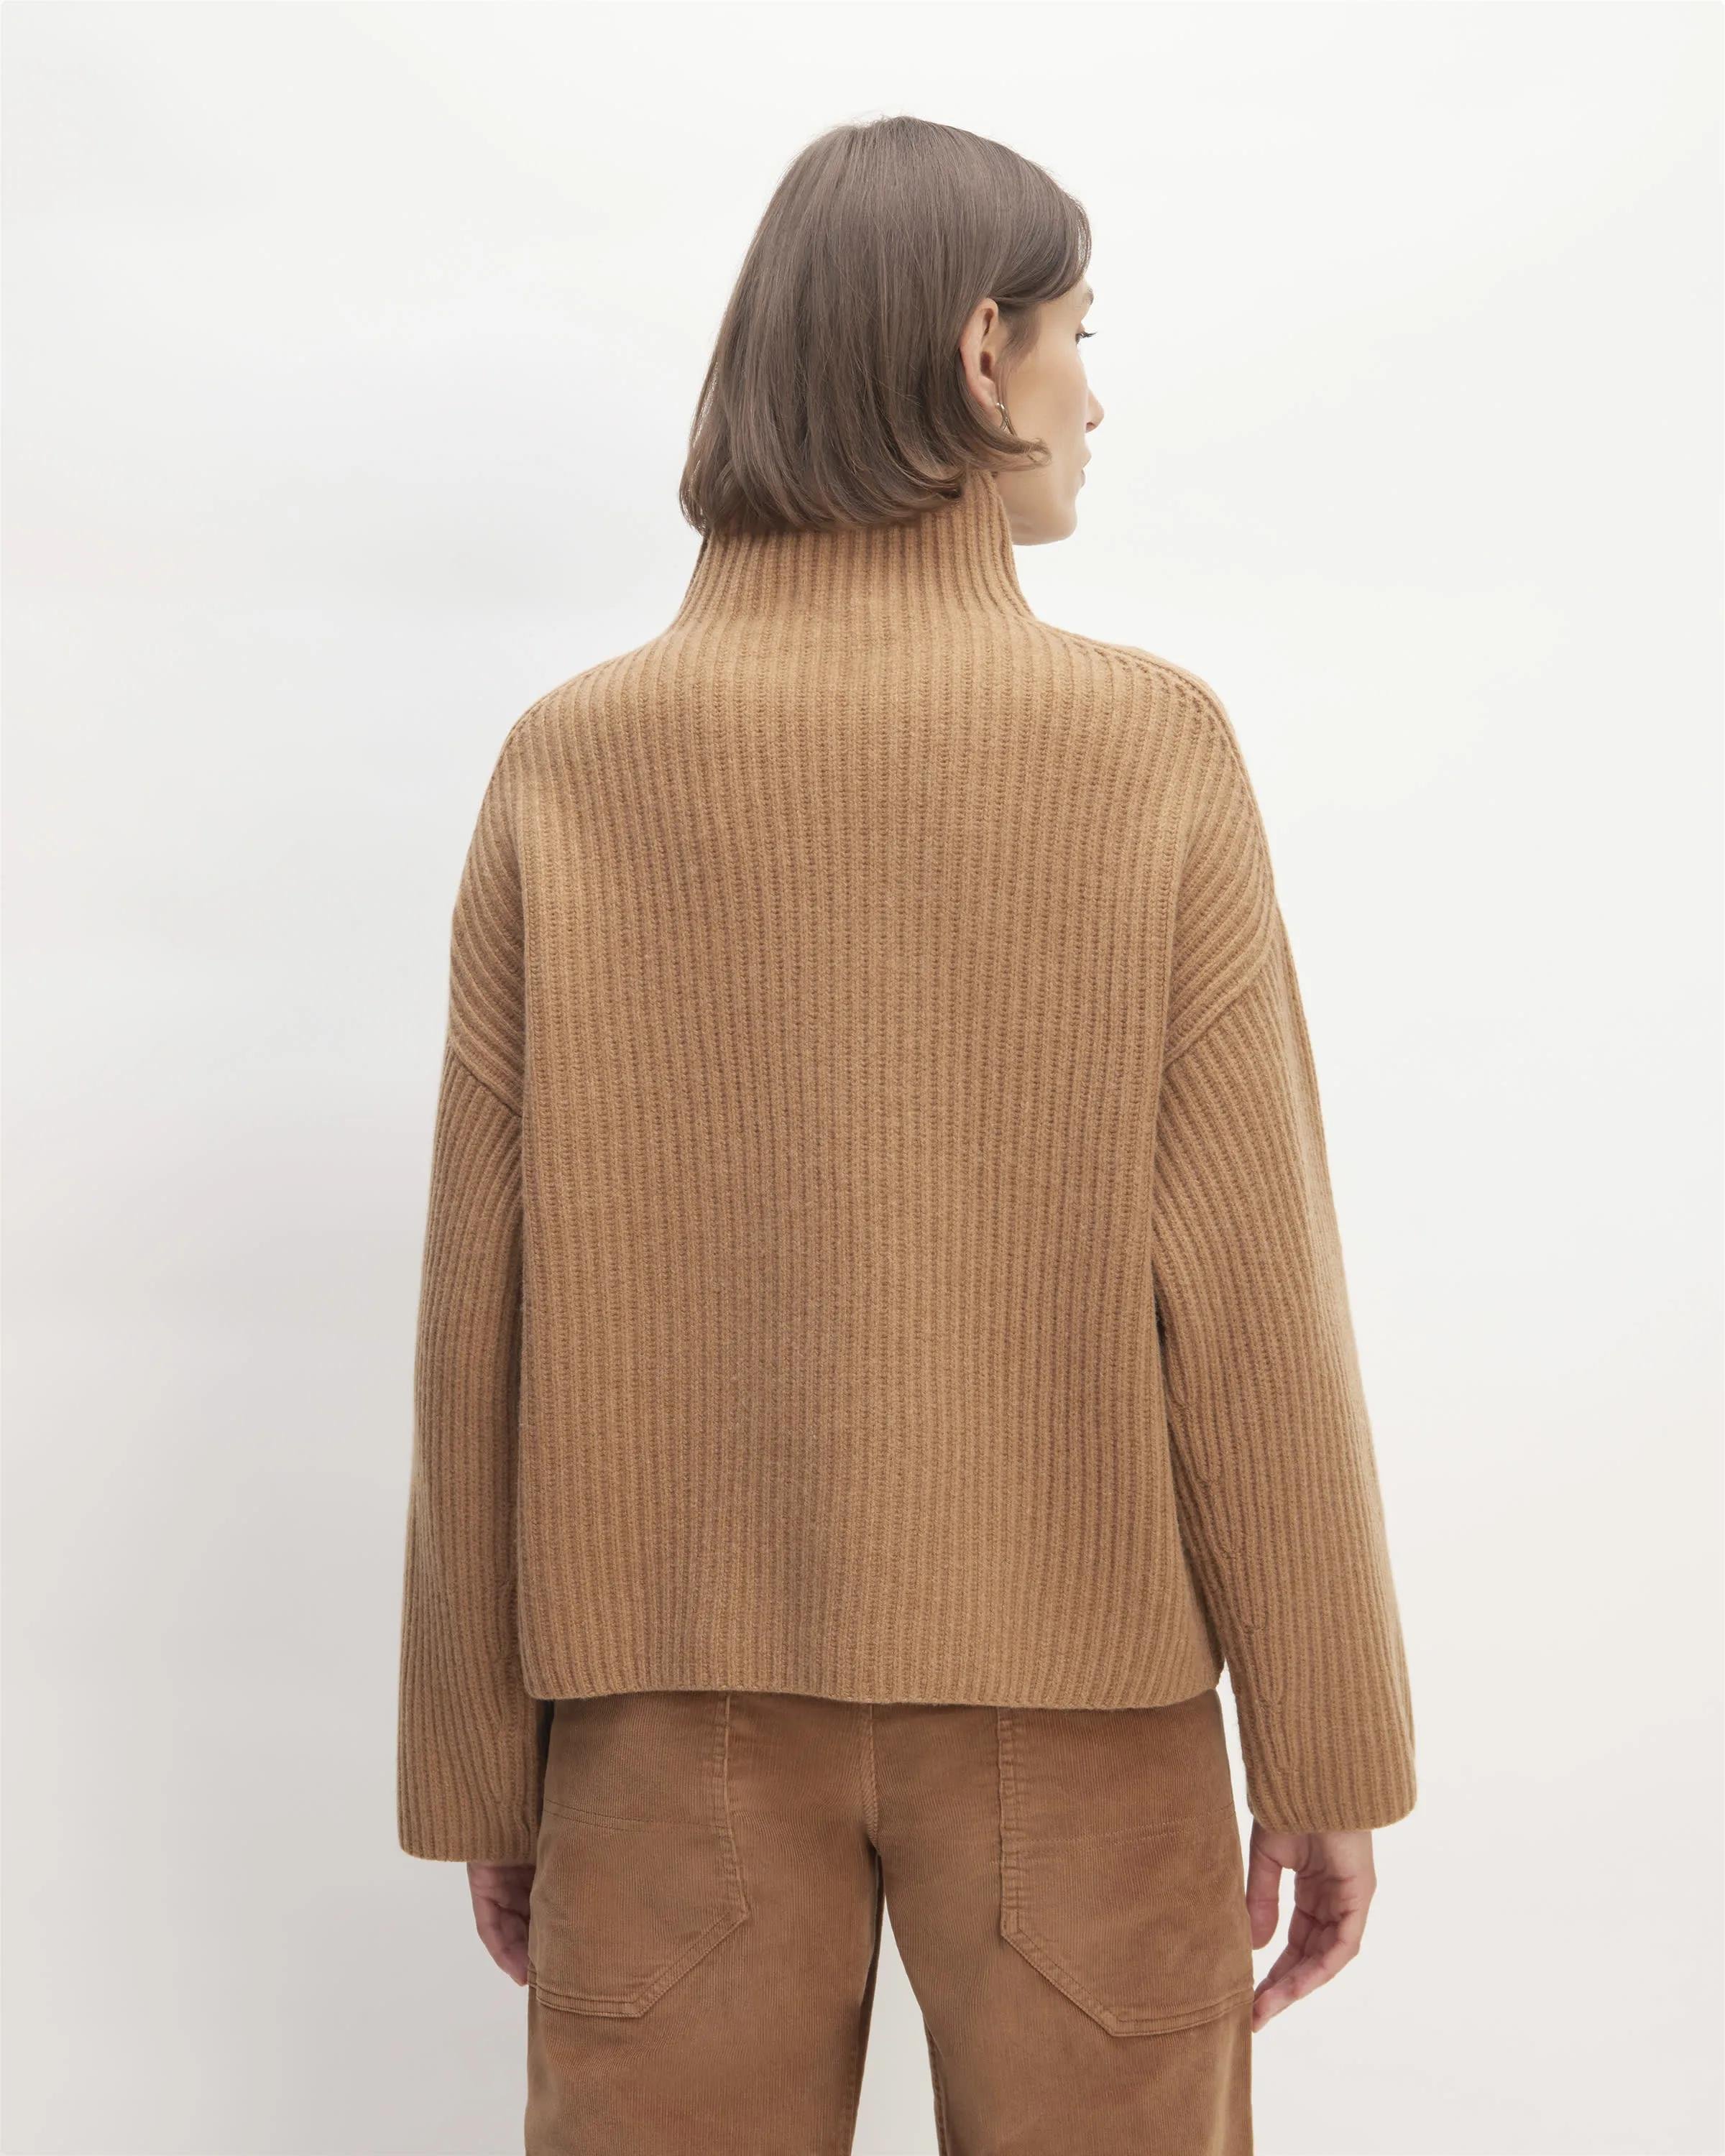 The Felted Merino Funnel-Neck Pullover by EVERLANE